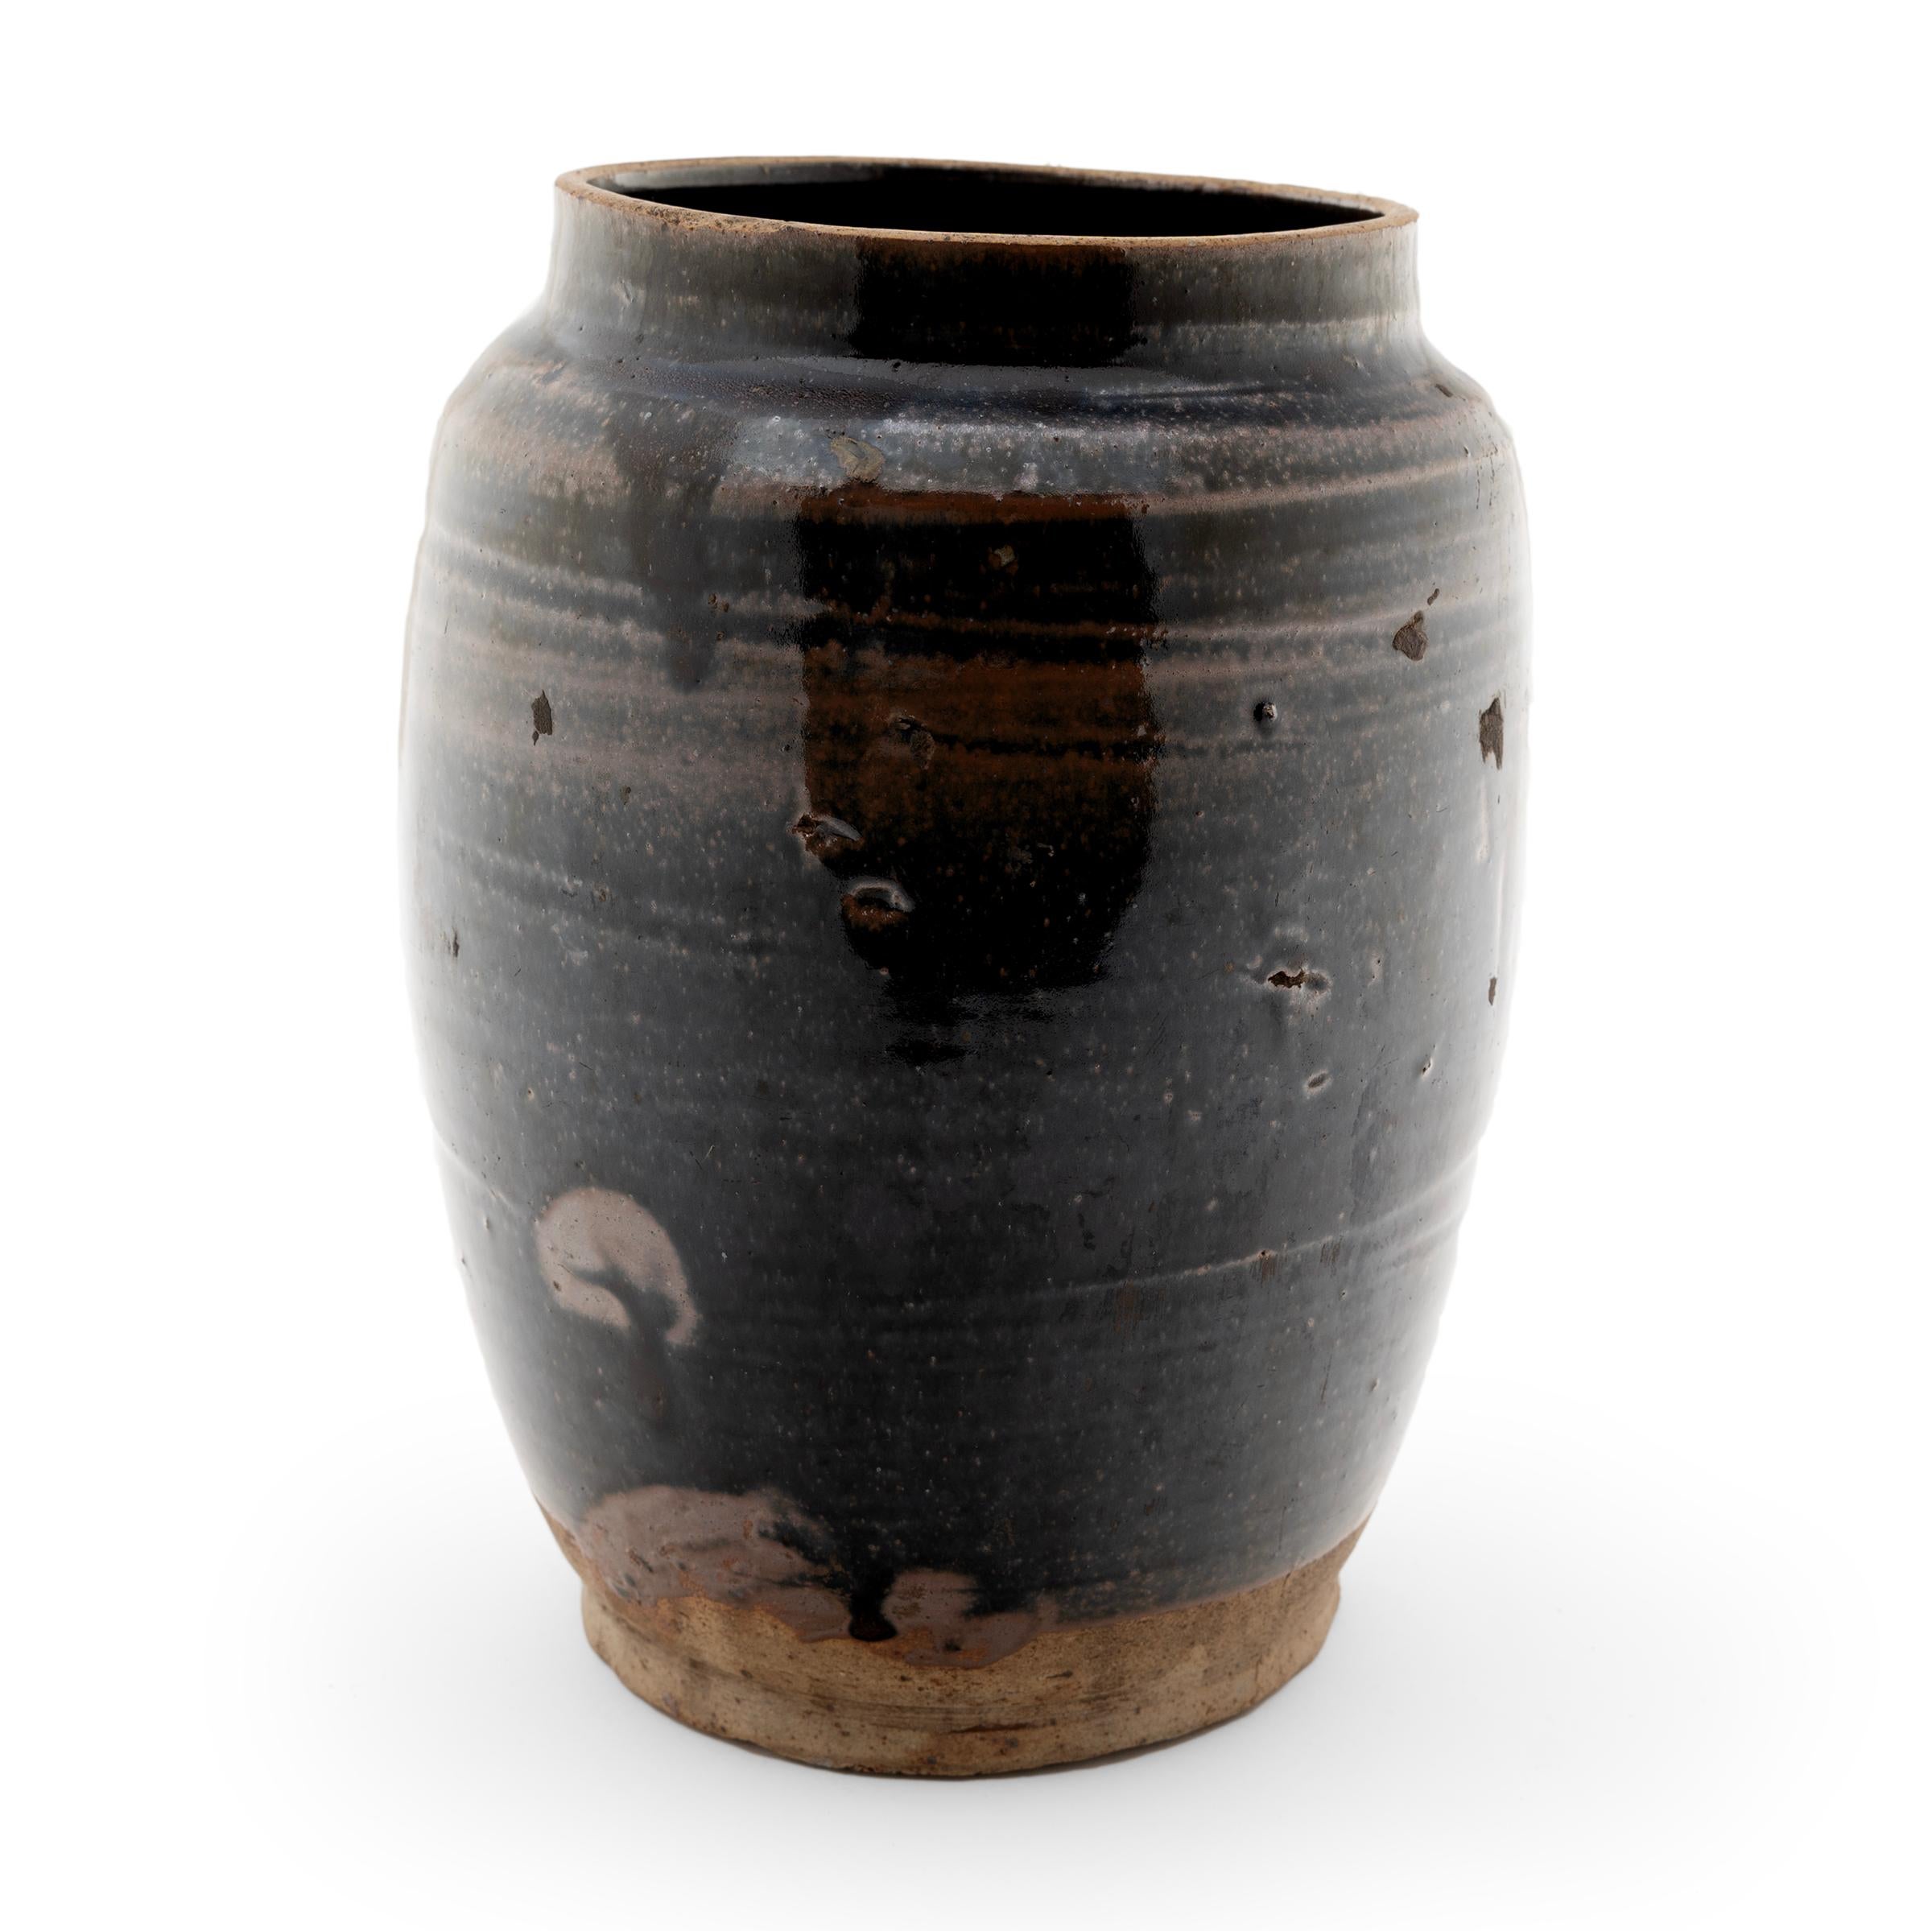 Originally used to store foods or pickle vegetables in a provincial Chinese kitchen, this late 19th-century ceramic jar is coated inside and out with a richly-colored dark glaze. The thin glaze drips down the sides, allowing the ripples of its spun